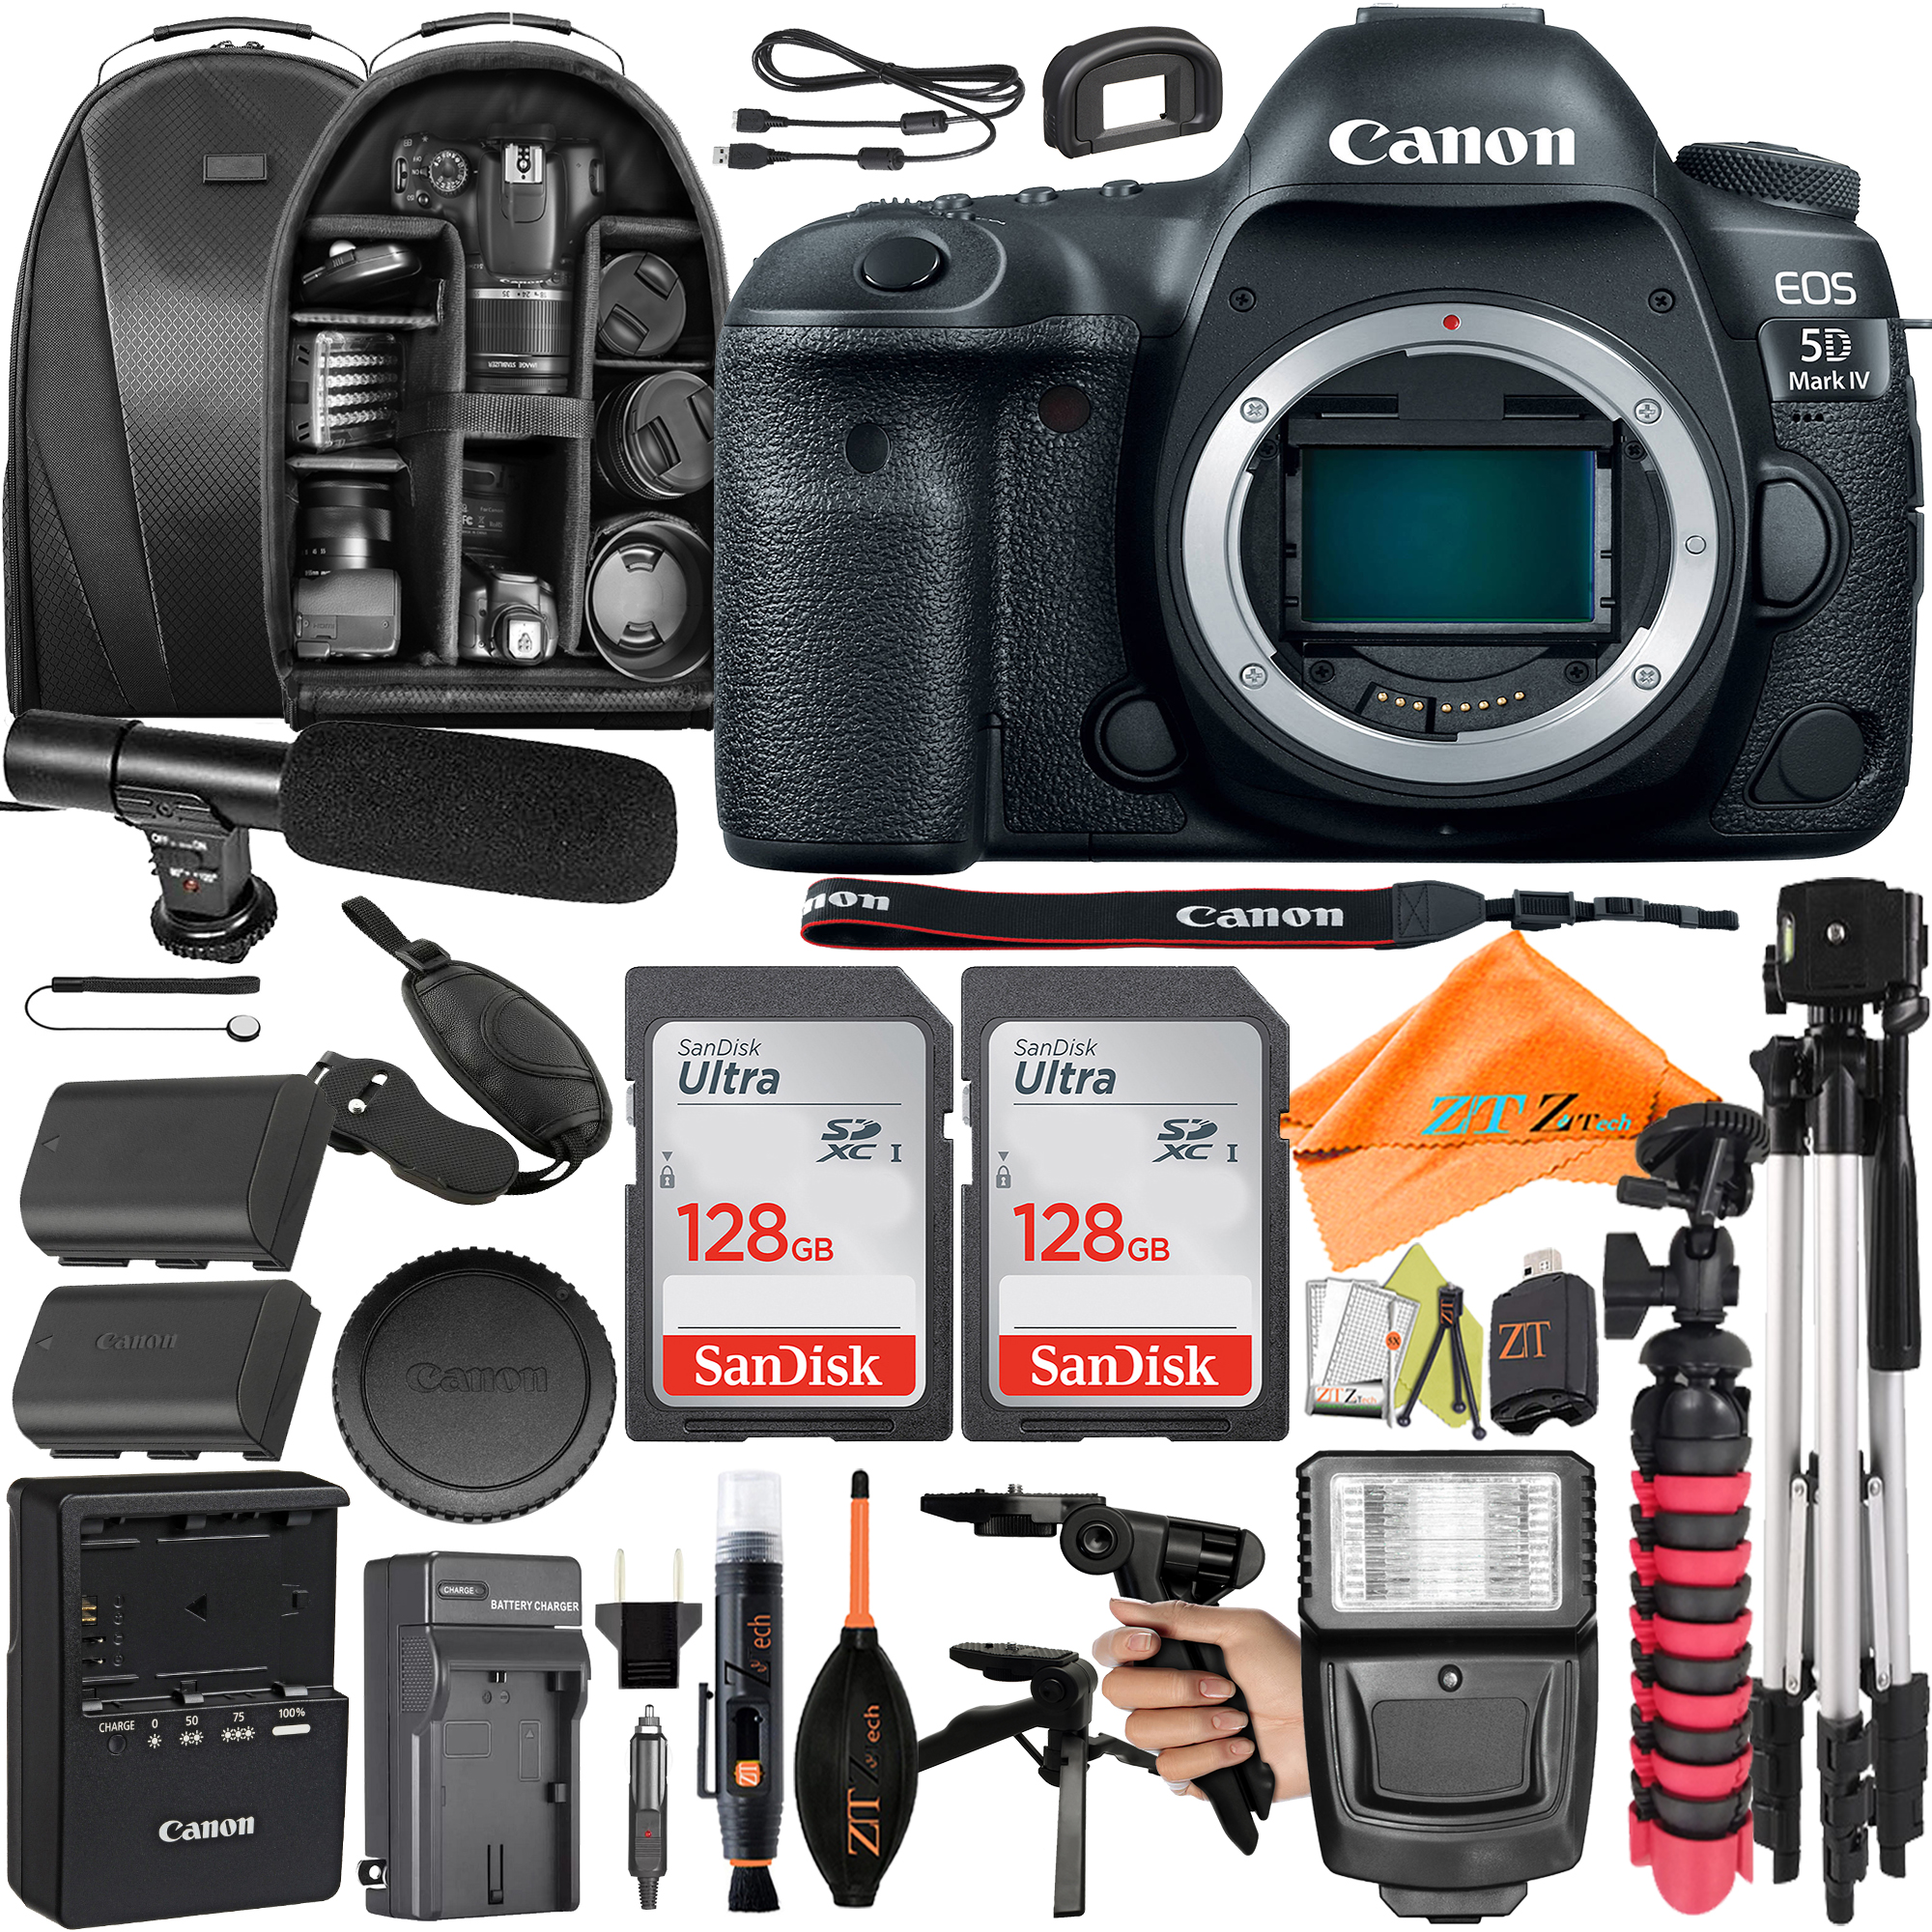 Canon EOS 5D Mark IV DSLR Camera (Body Only) with SanDisk 128GB + Backpack Case + Microphone + ZeeTech Accessory Bundle